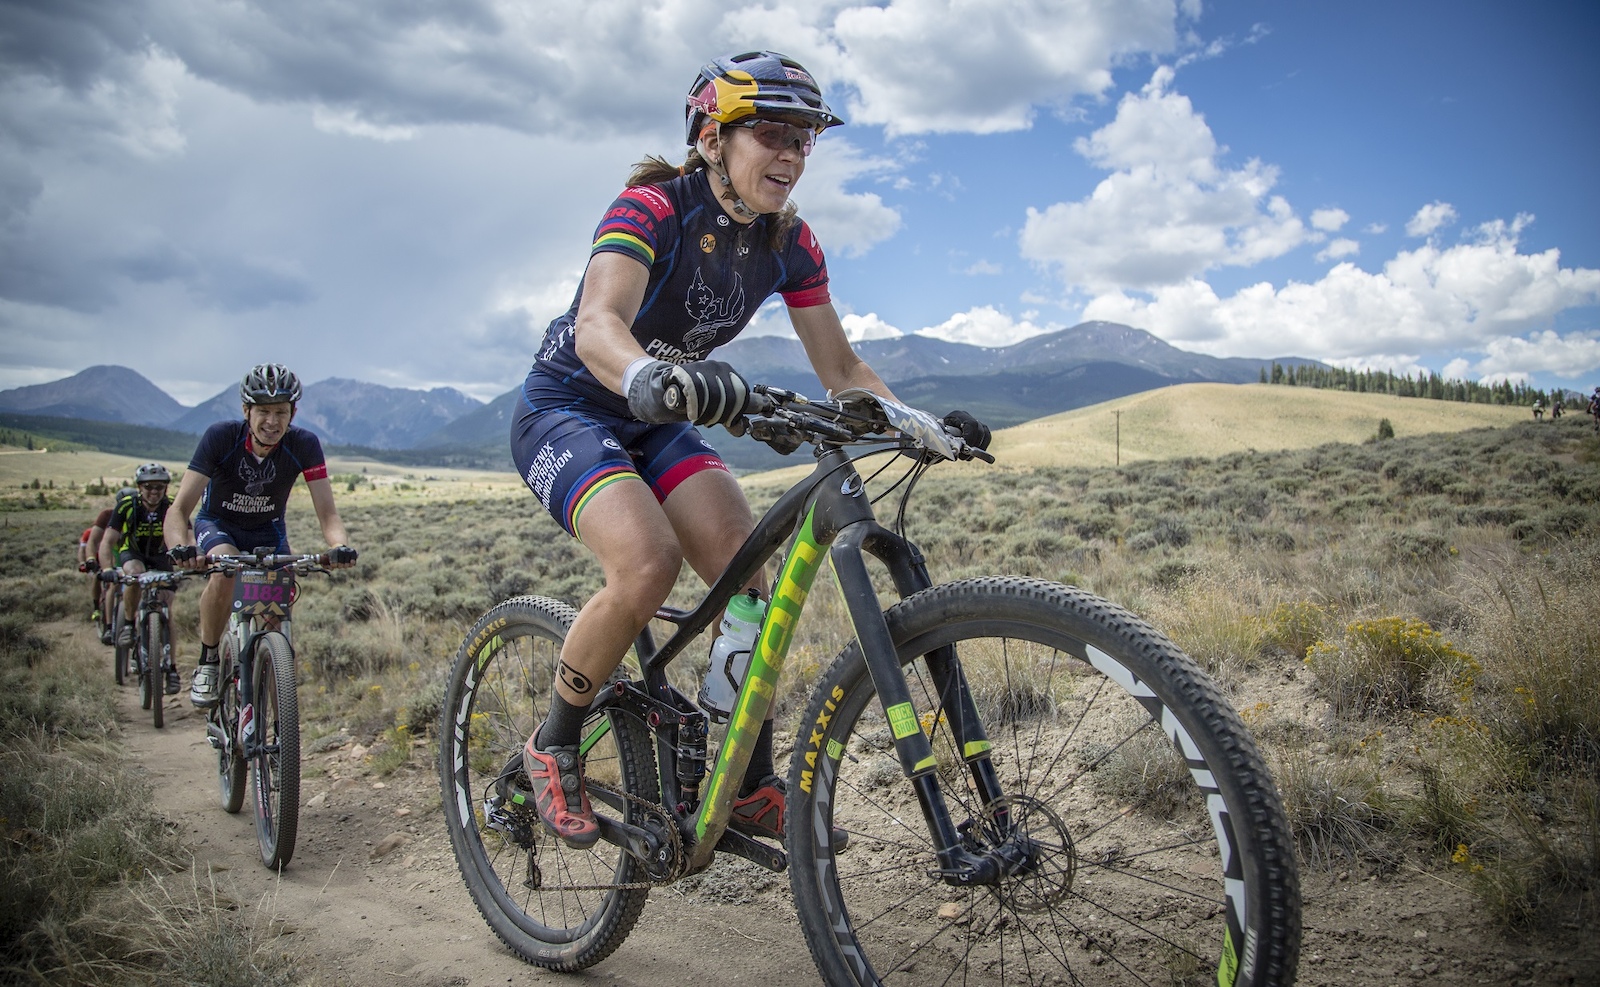 Rebecca Rusch racing up the singletrack portion of the course during the Leadville 100 MTB Race on August 15, 2015.